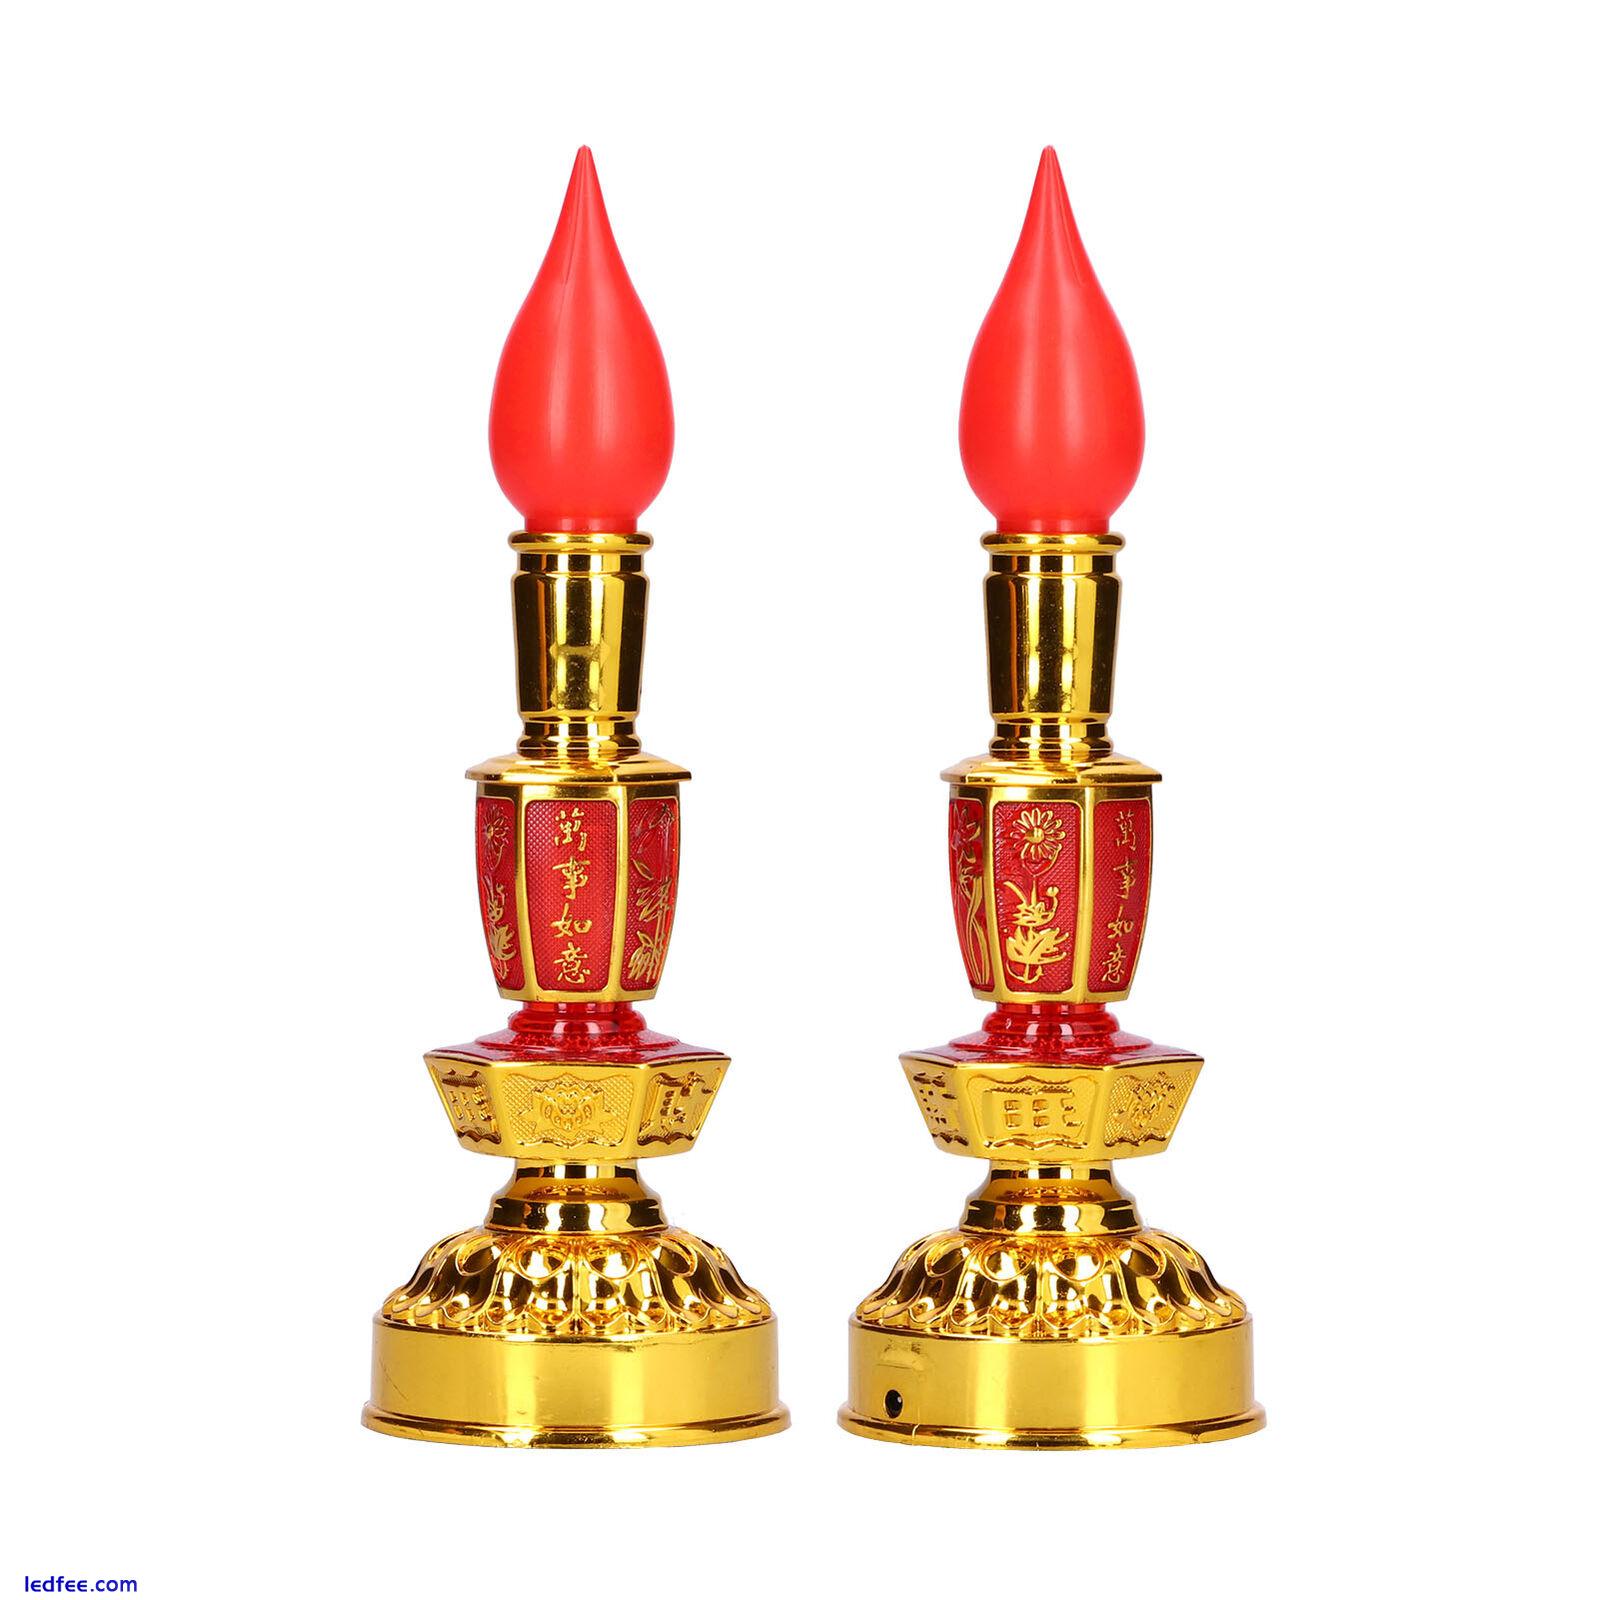 (Double Bright Electric Candle)Candle Lamp Flower Buddhist Light LED MG DG 3 